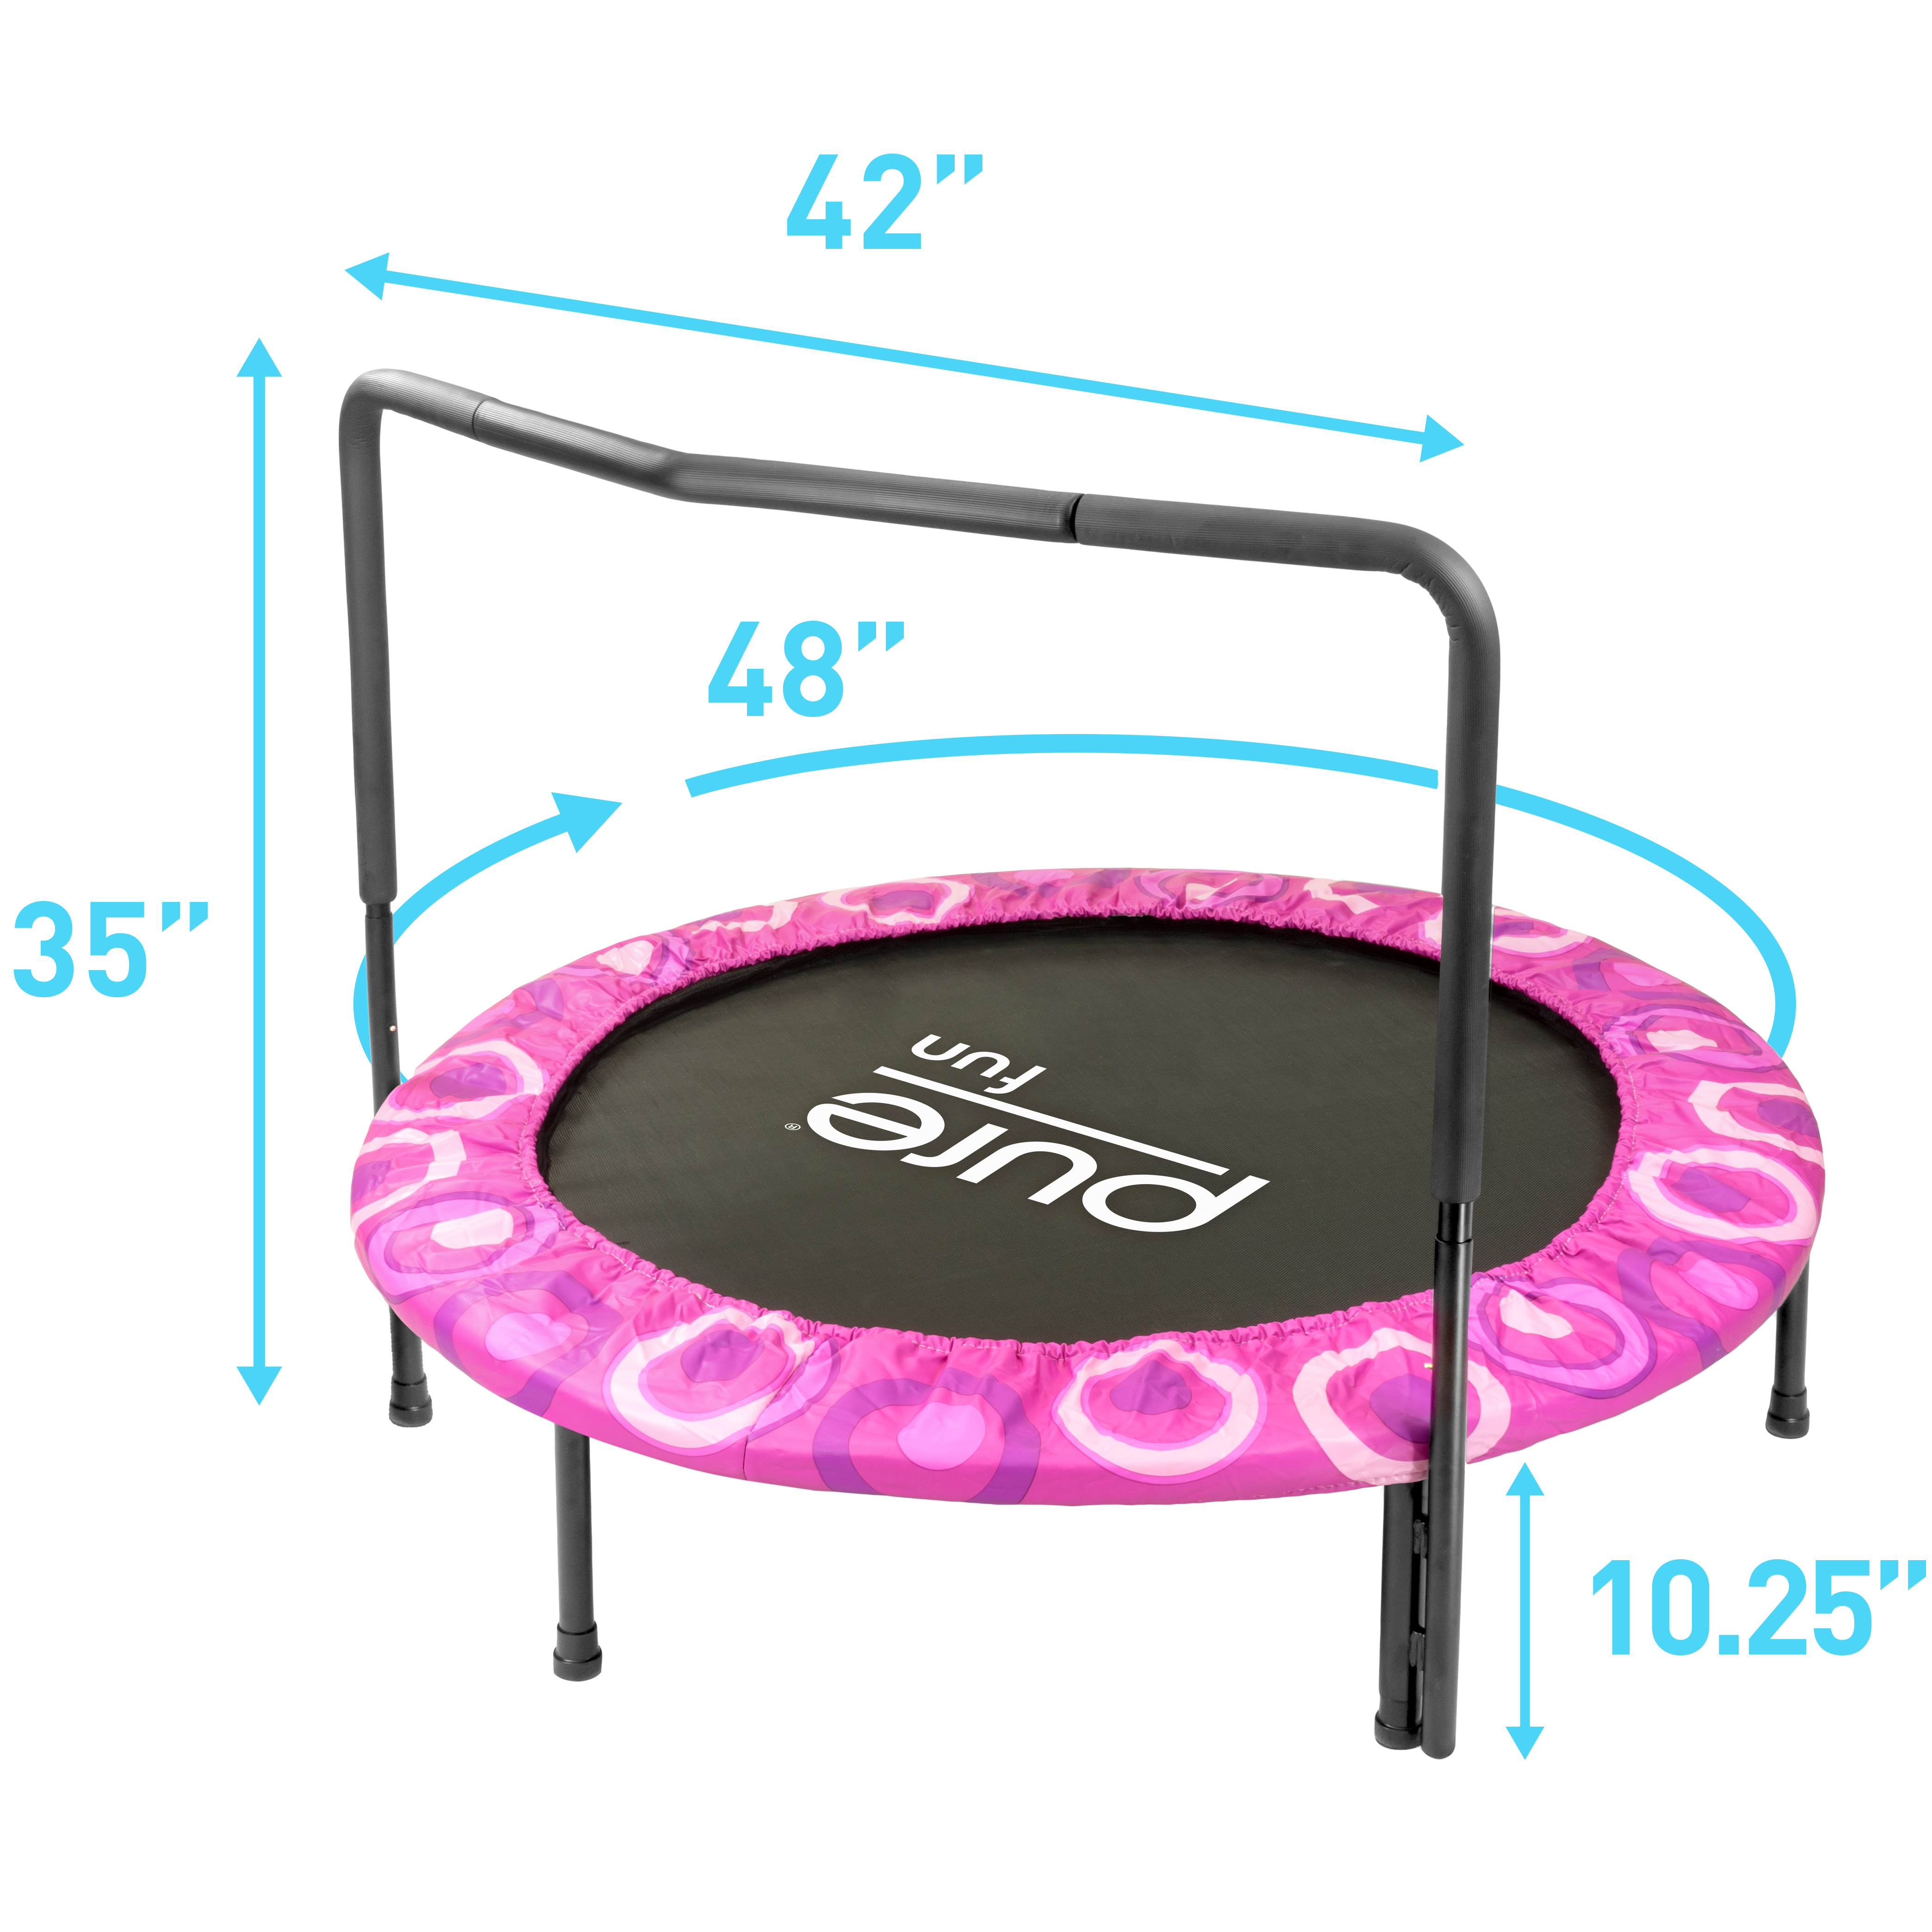 Pure Fun Super Jumper Kids 48-Inch Trampoline with Handrail, Pink, 100lb Weight Limit - image 3 of 6